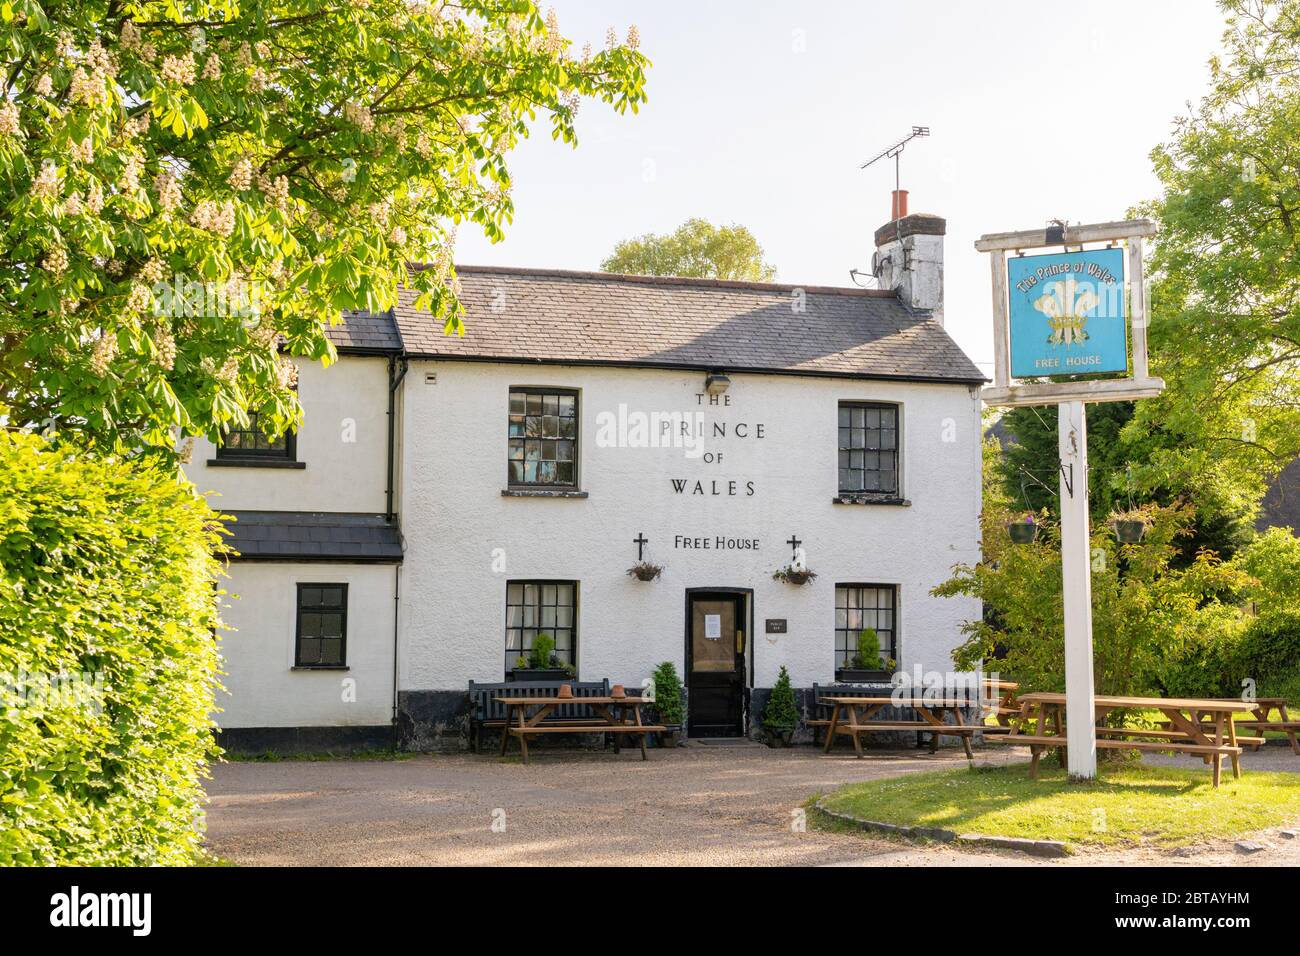 Exterior of the Prince of Wales Pub in Green Tye, Much Hadham. UK, closed during the Covid 19  / Coronavirus pandemic. Stock Photo